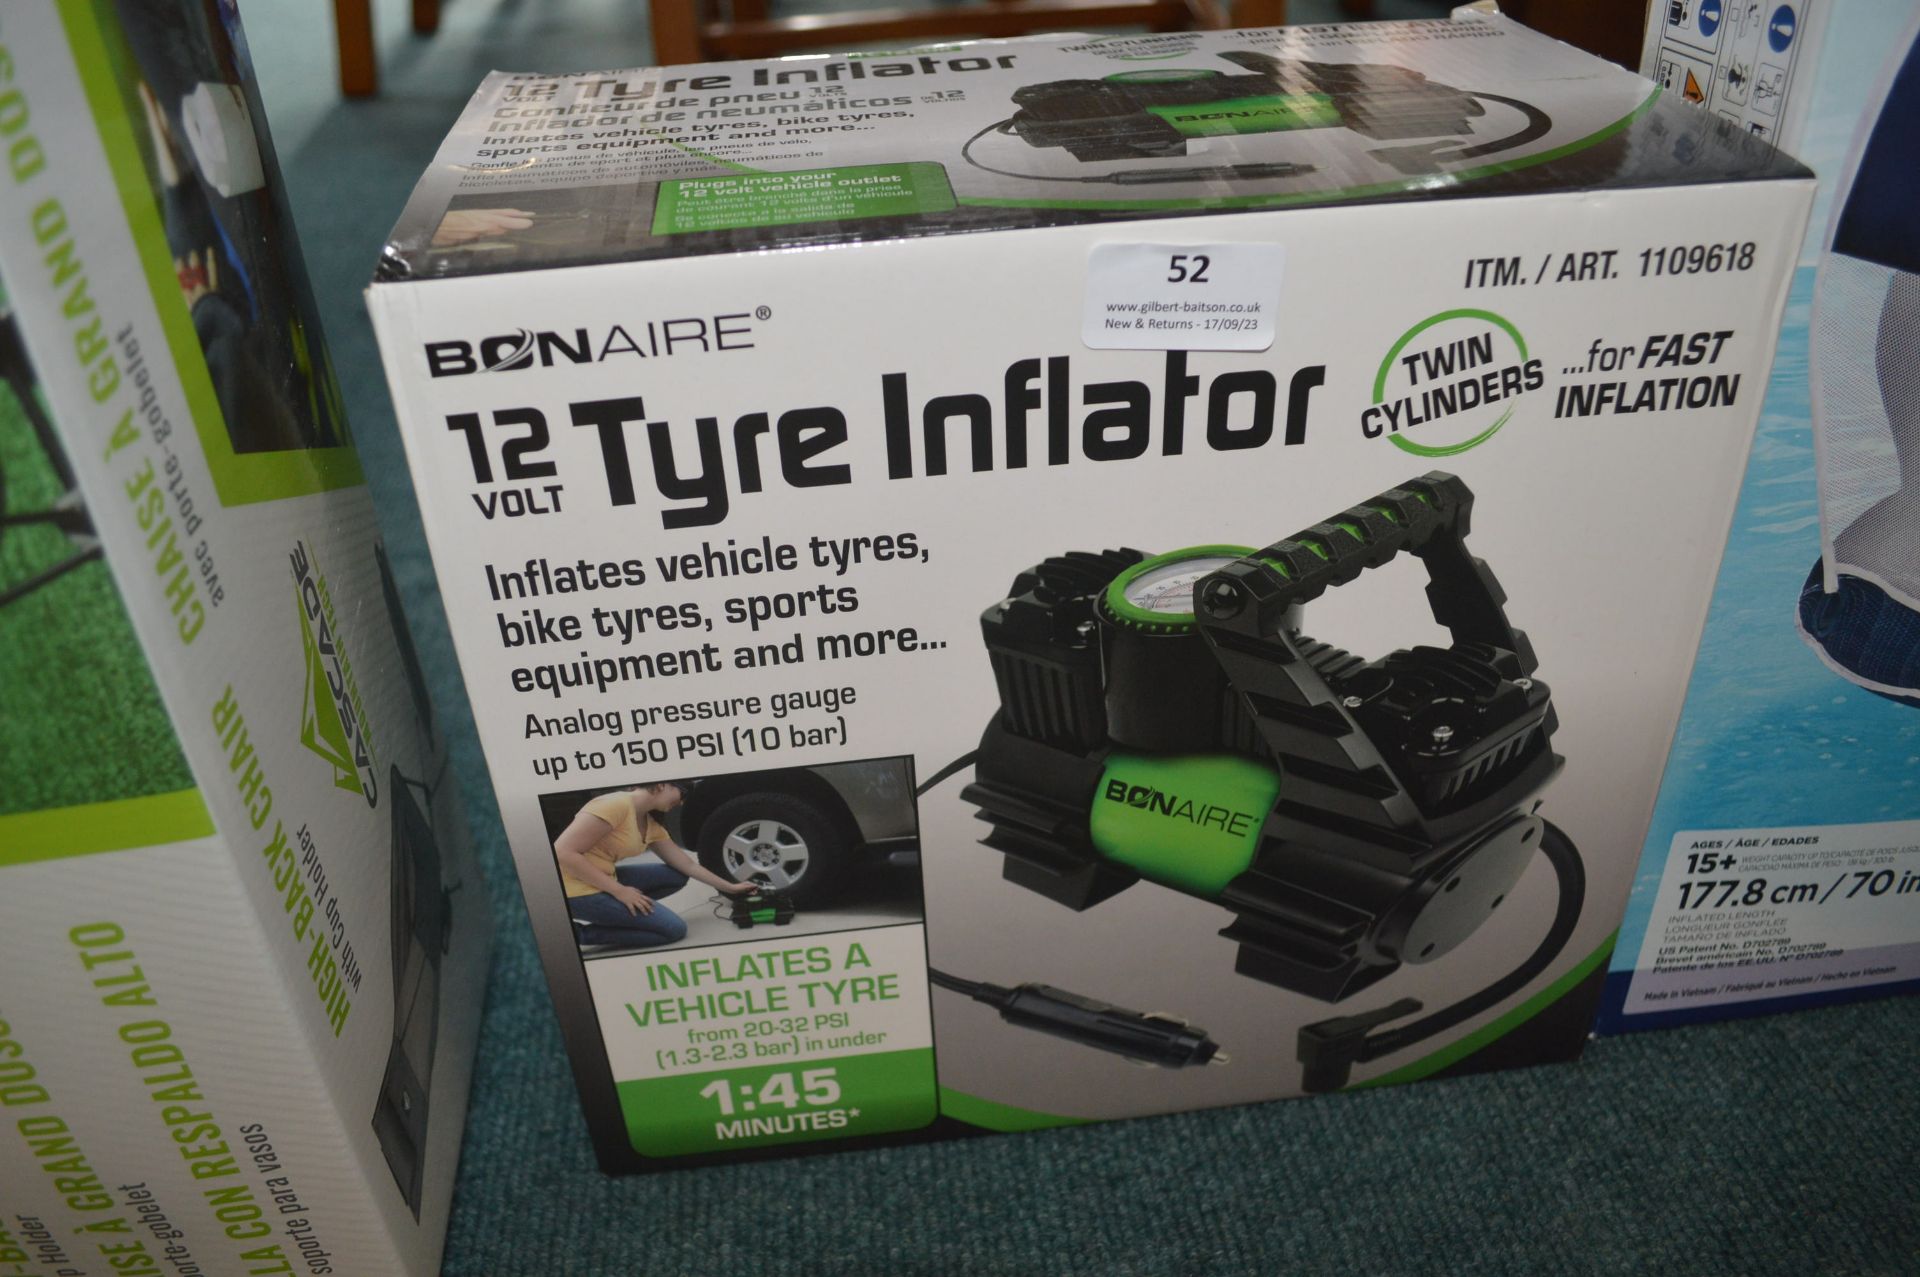 *Bon-Aire 12V Tyre Inflator